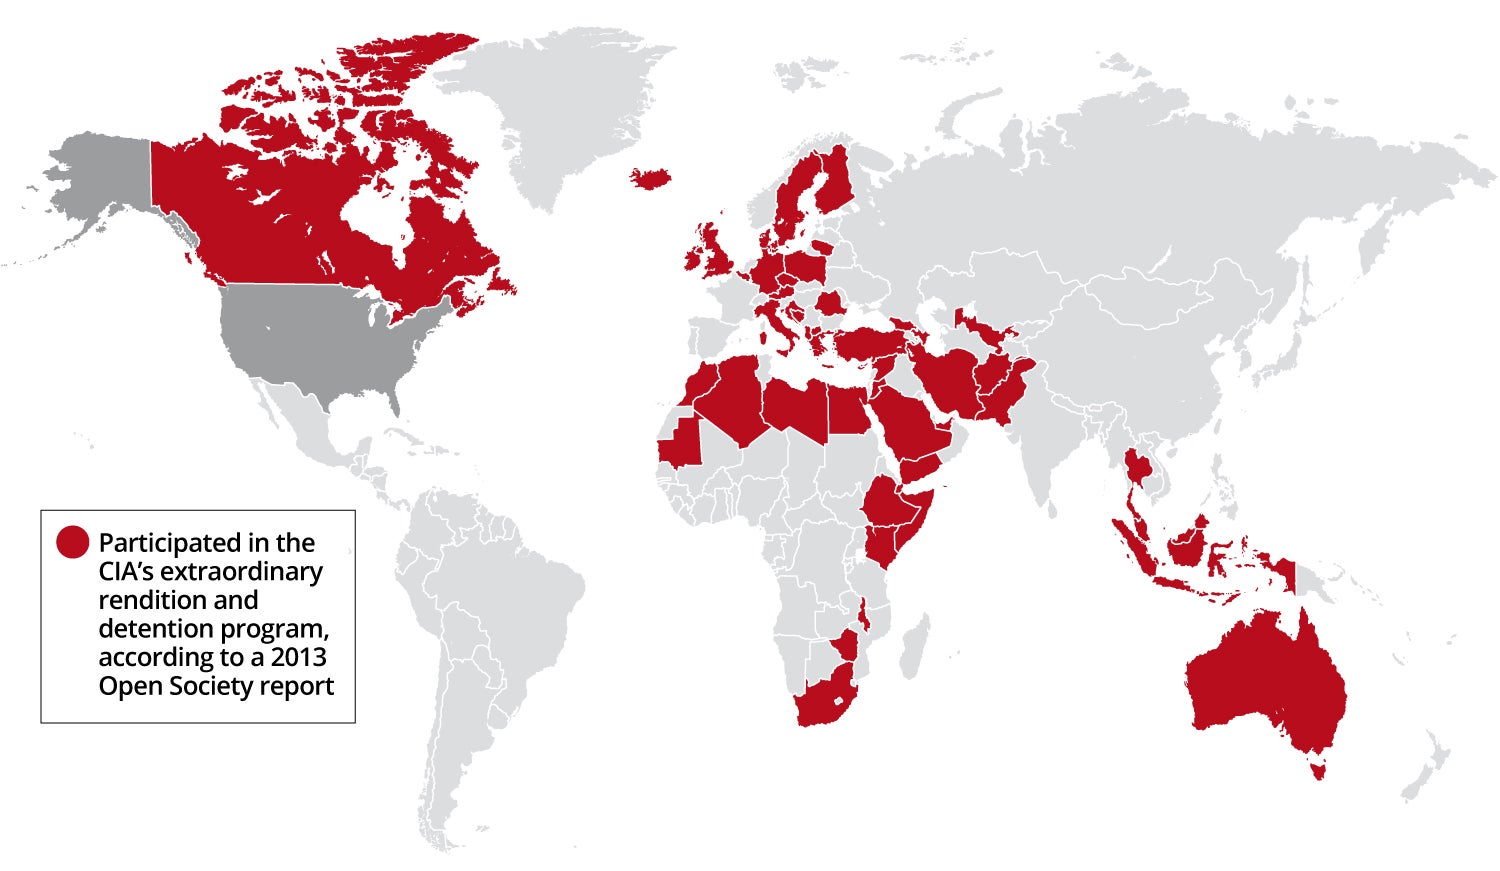 The countries which, according to Open Society, participated in the CIA programme